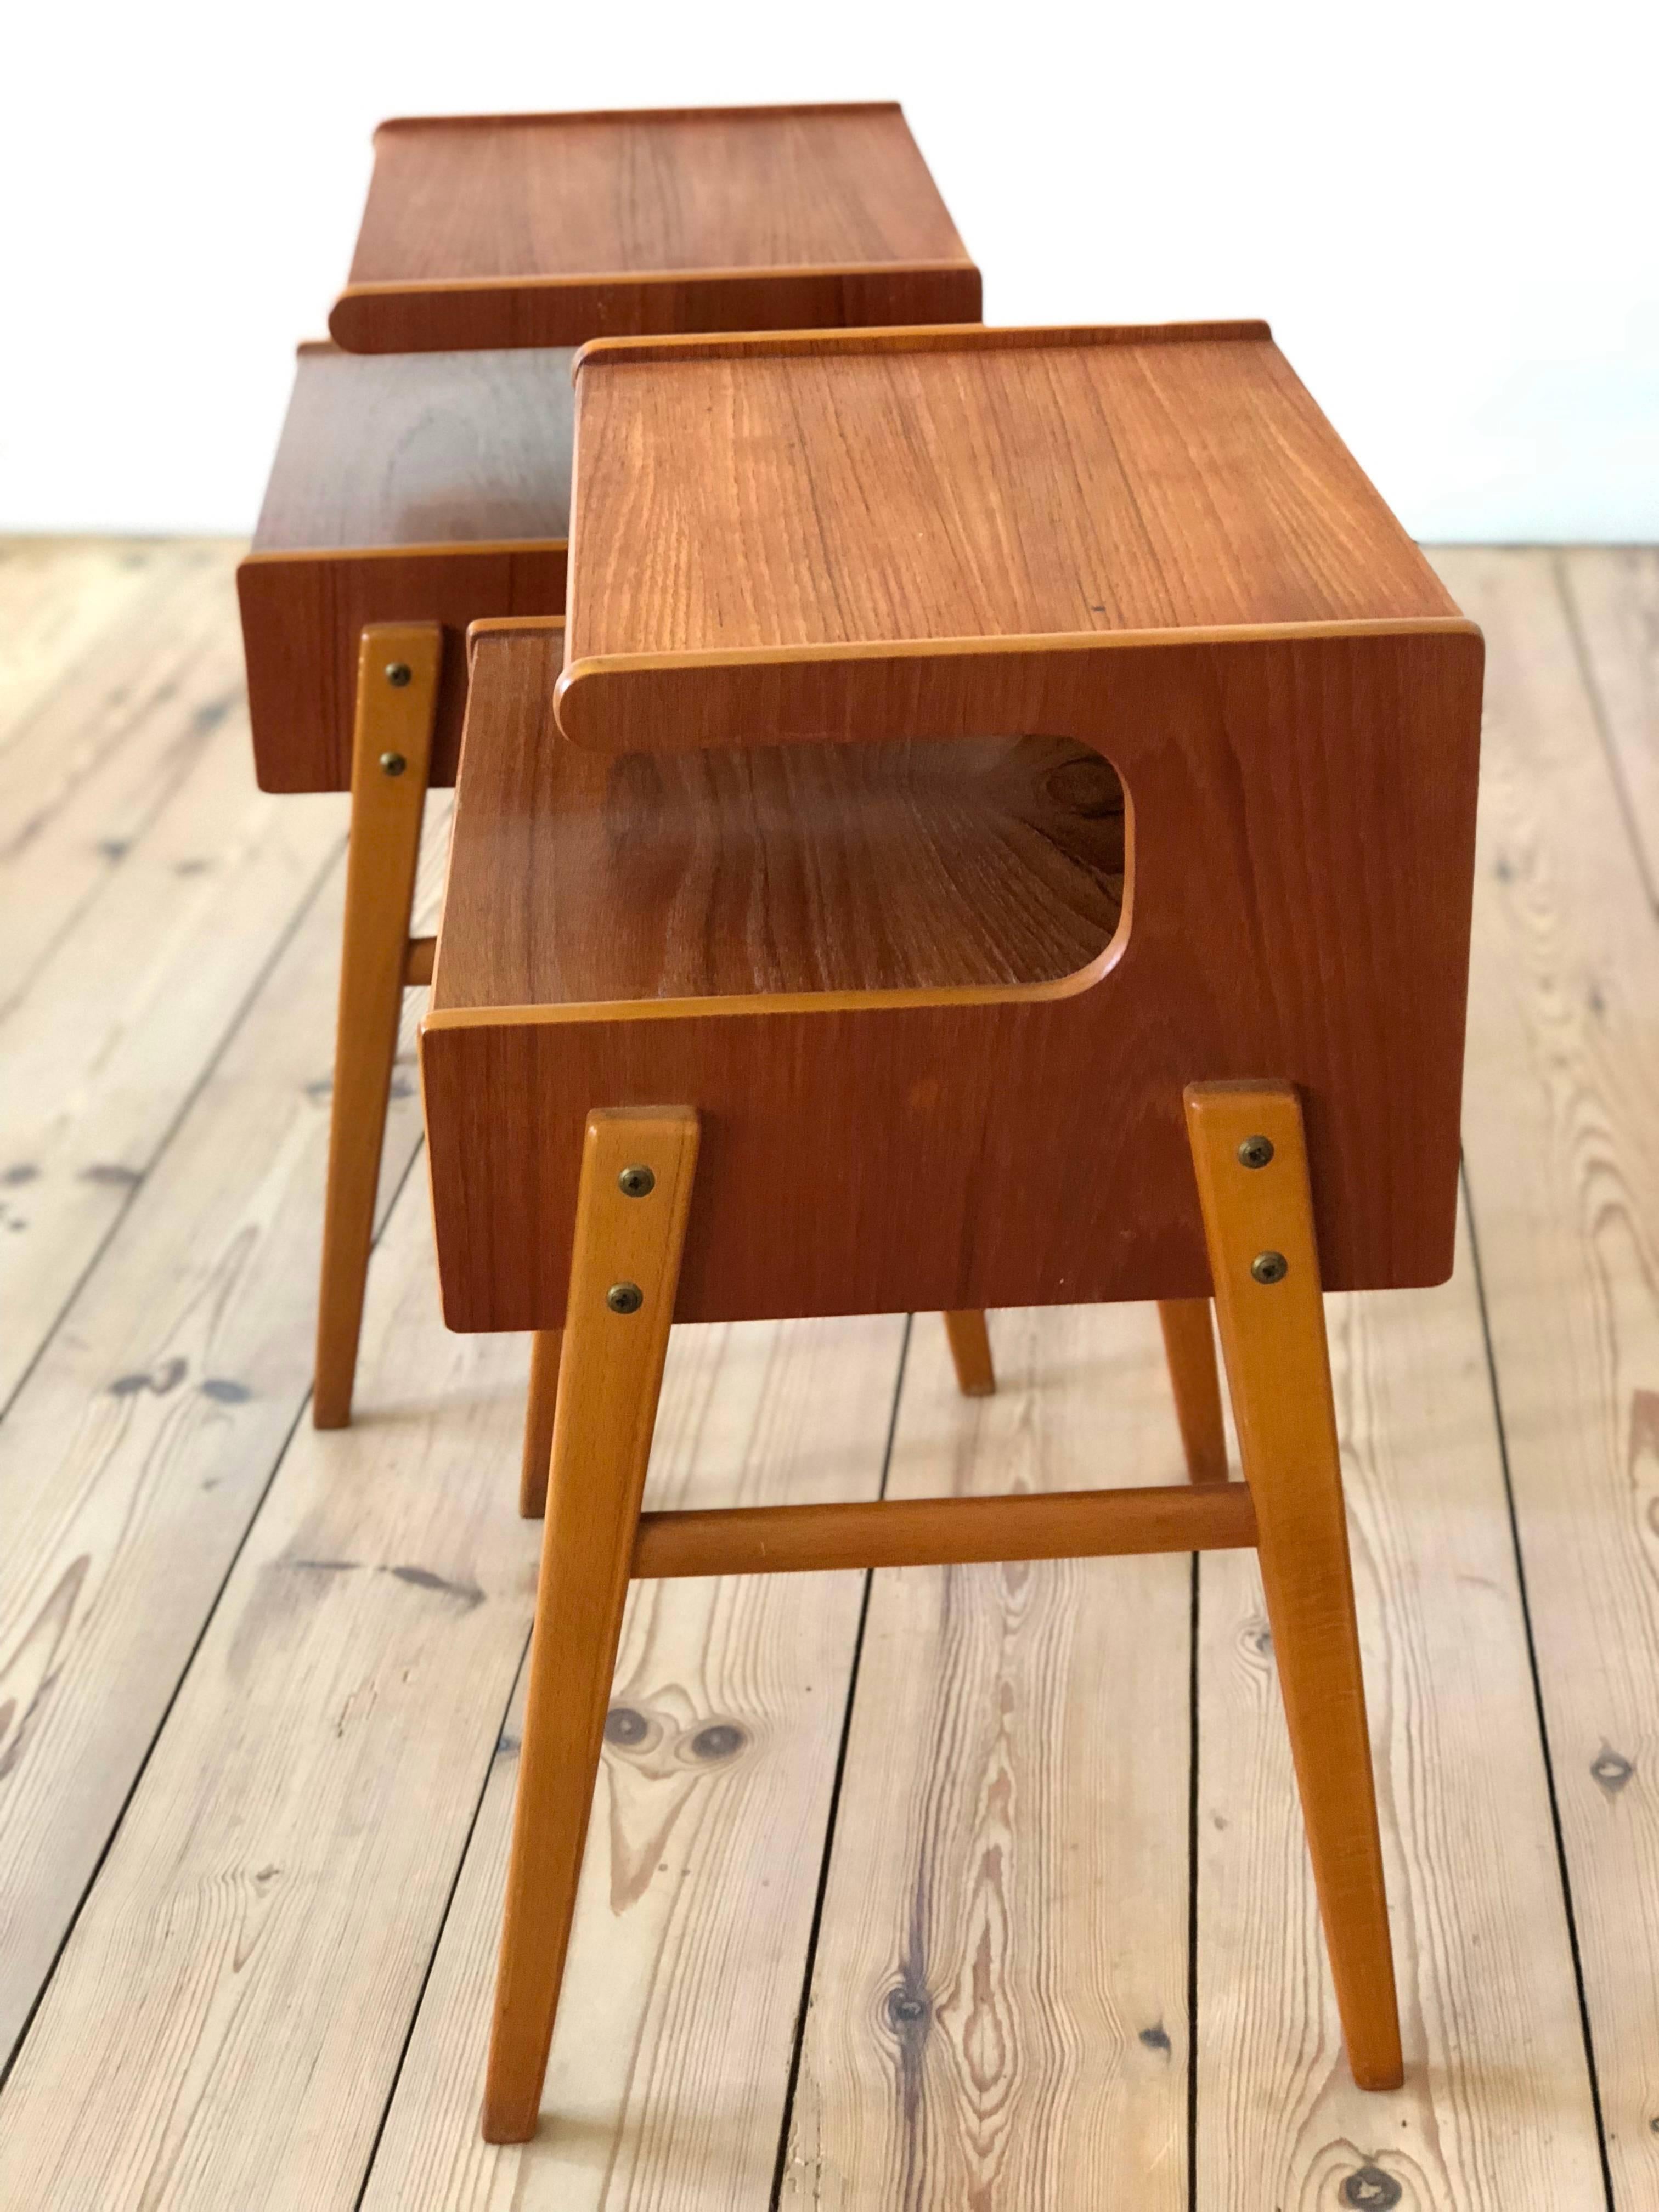 Teak and beech nightstands manufactured in Denmark in the 1960s. They each feature a drawer with shelf and top plate in a deep red teak hue. Sitting on beech frame base. Both these stands are in a very good vintage condition. Legs can be removed for